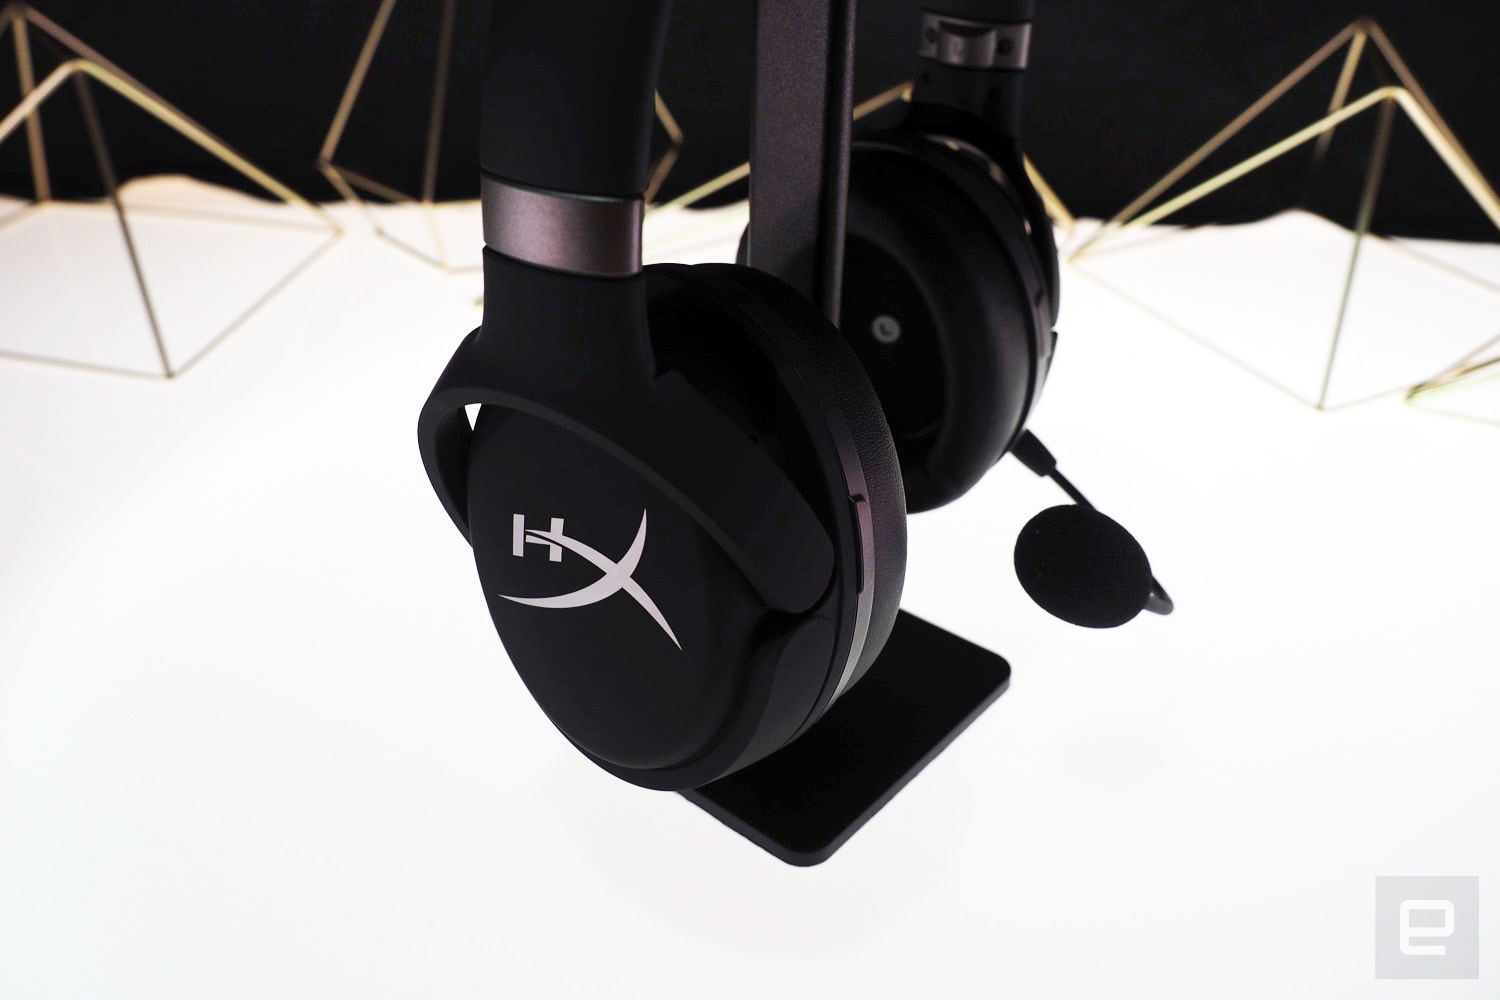 HyperX's new 7.1 headset gets even more immersive with head tracking | DeviceDaily.com